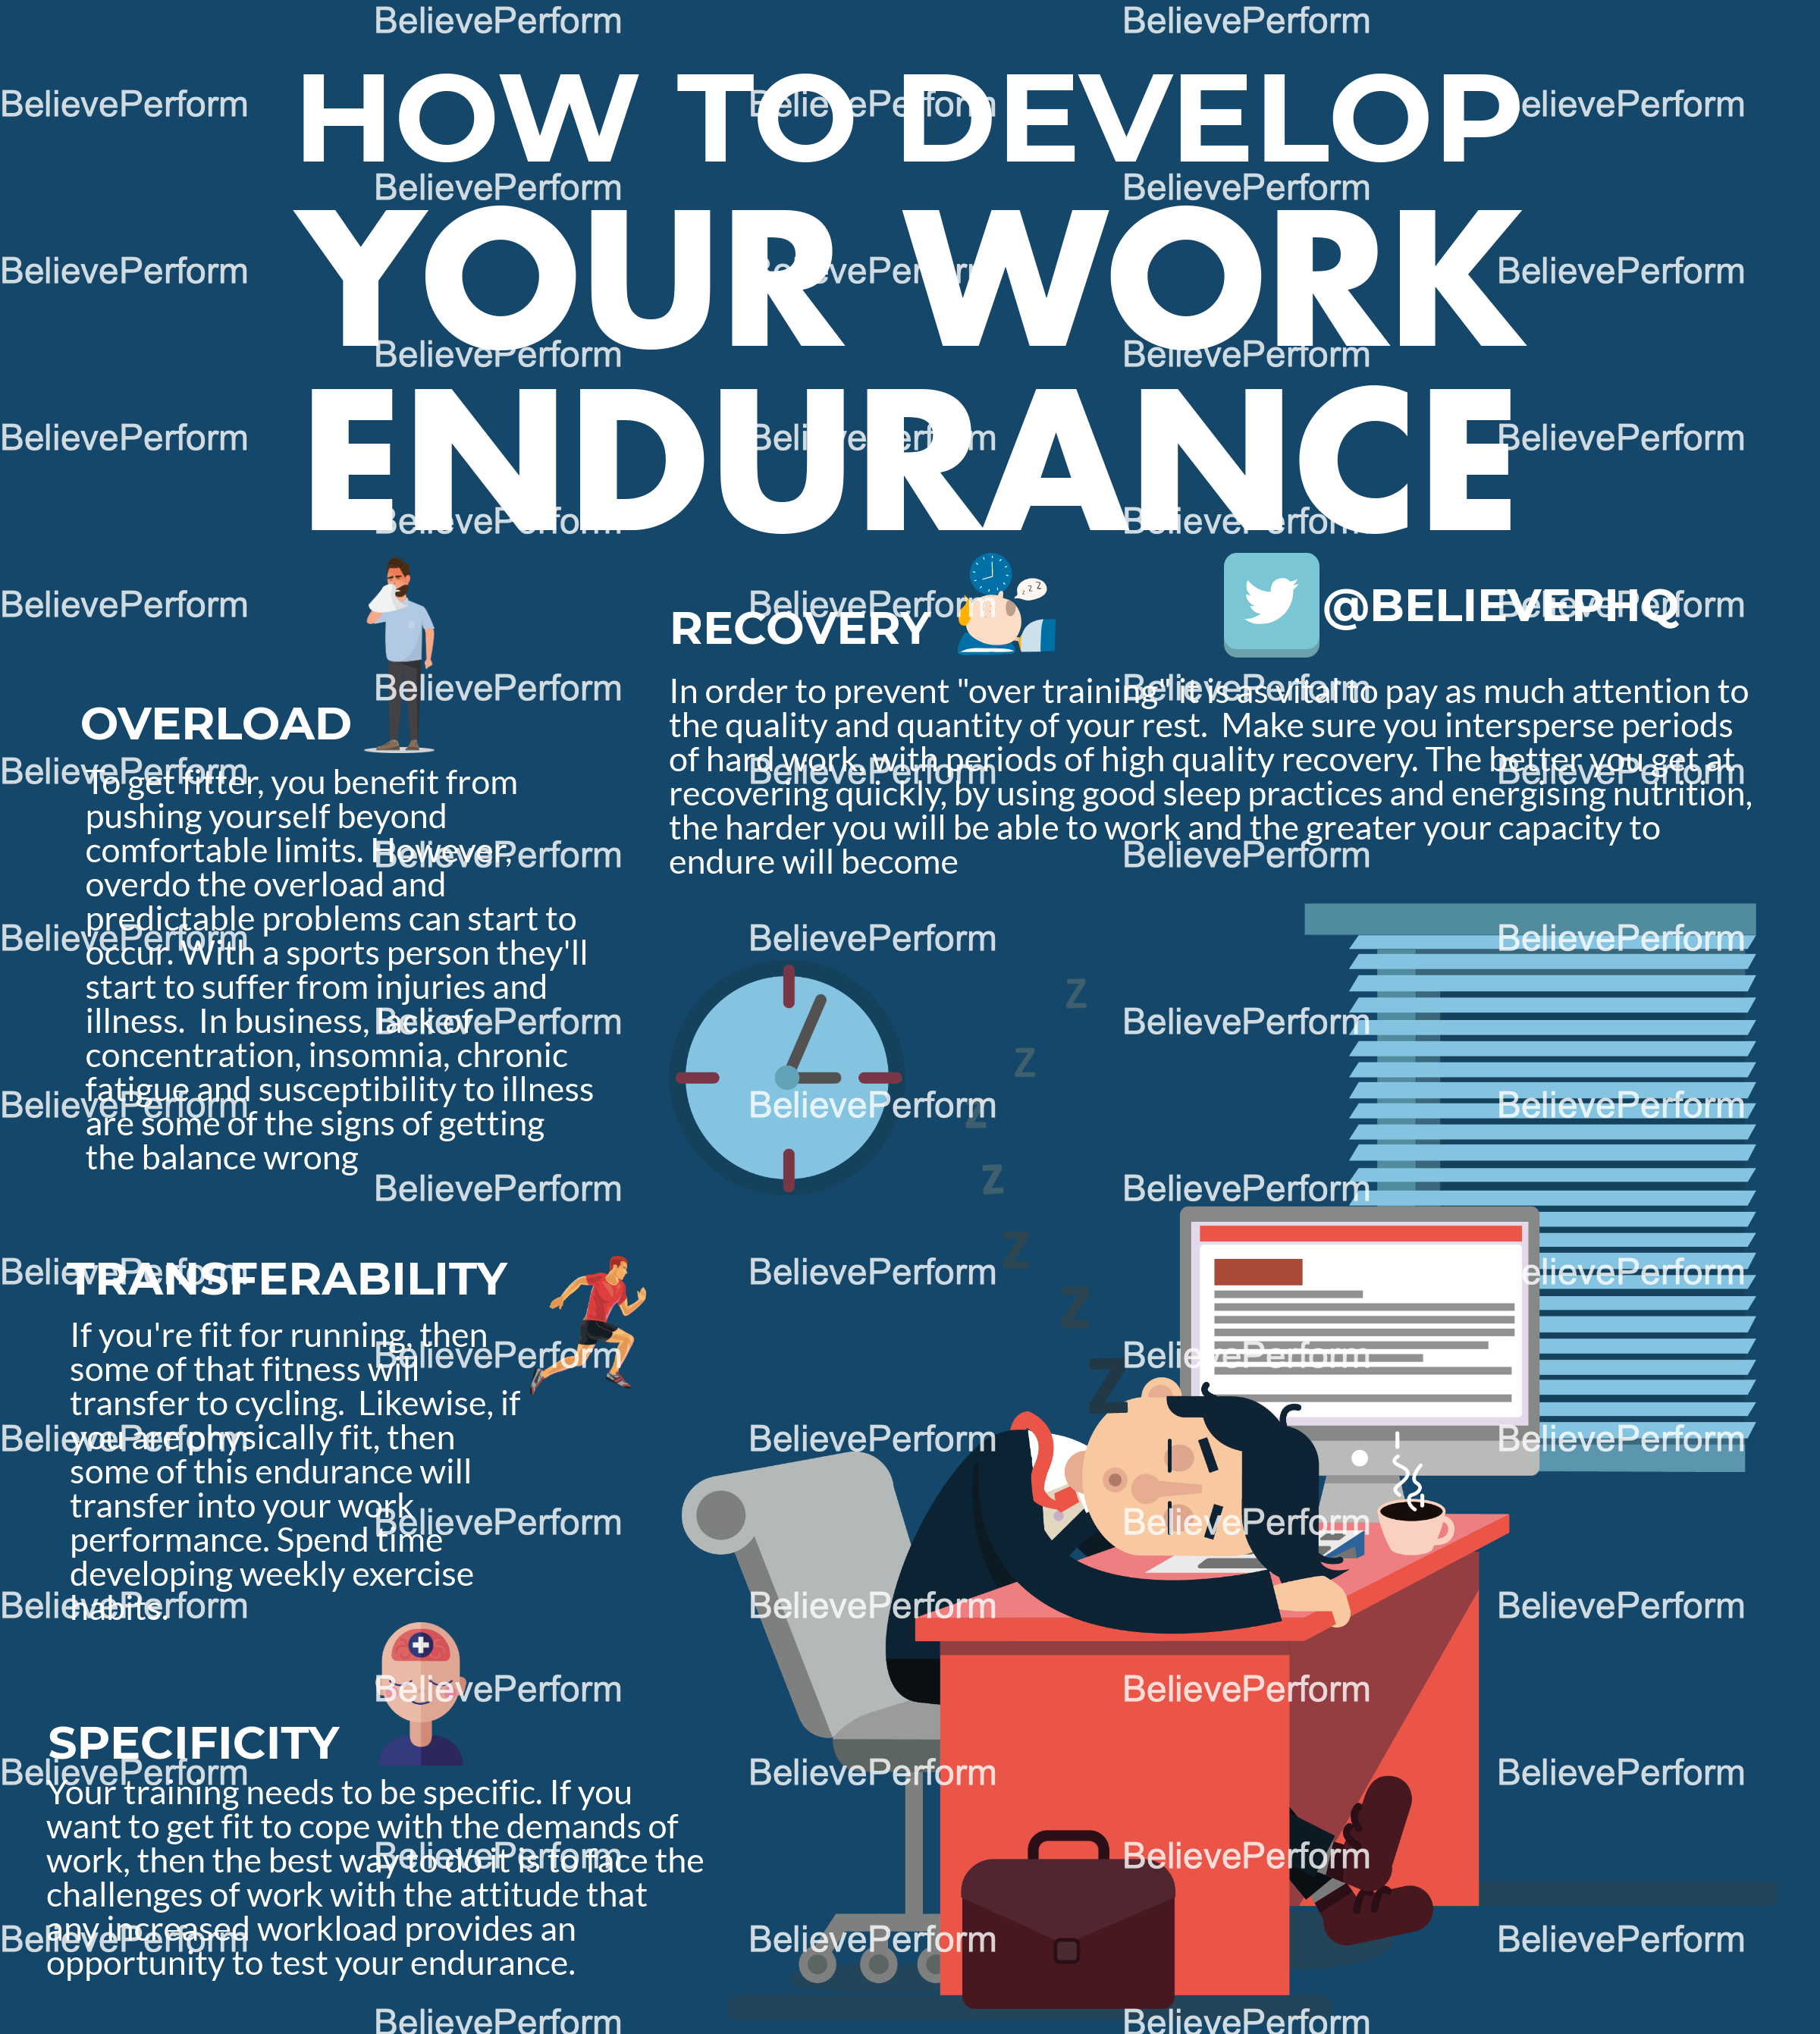 to develop your work endurance - BelievePerform - The leading Website